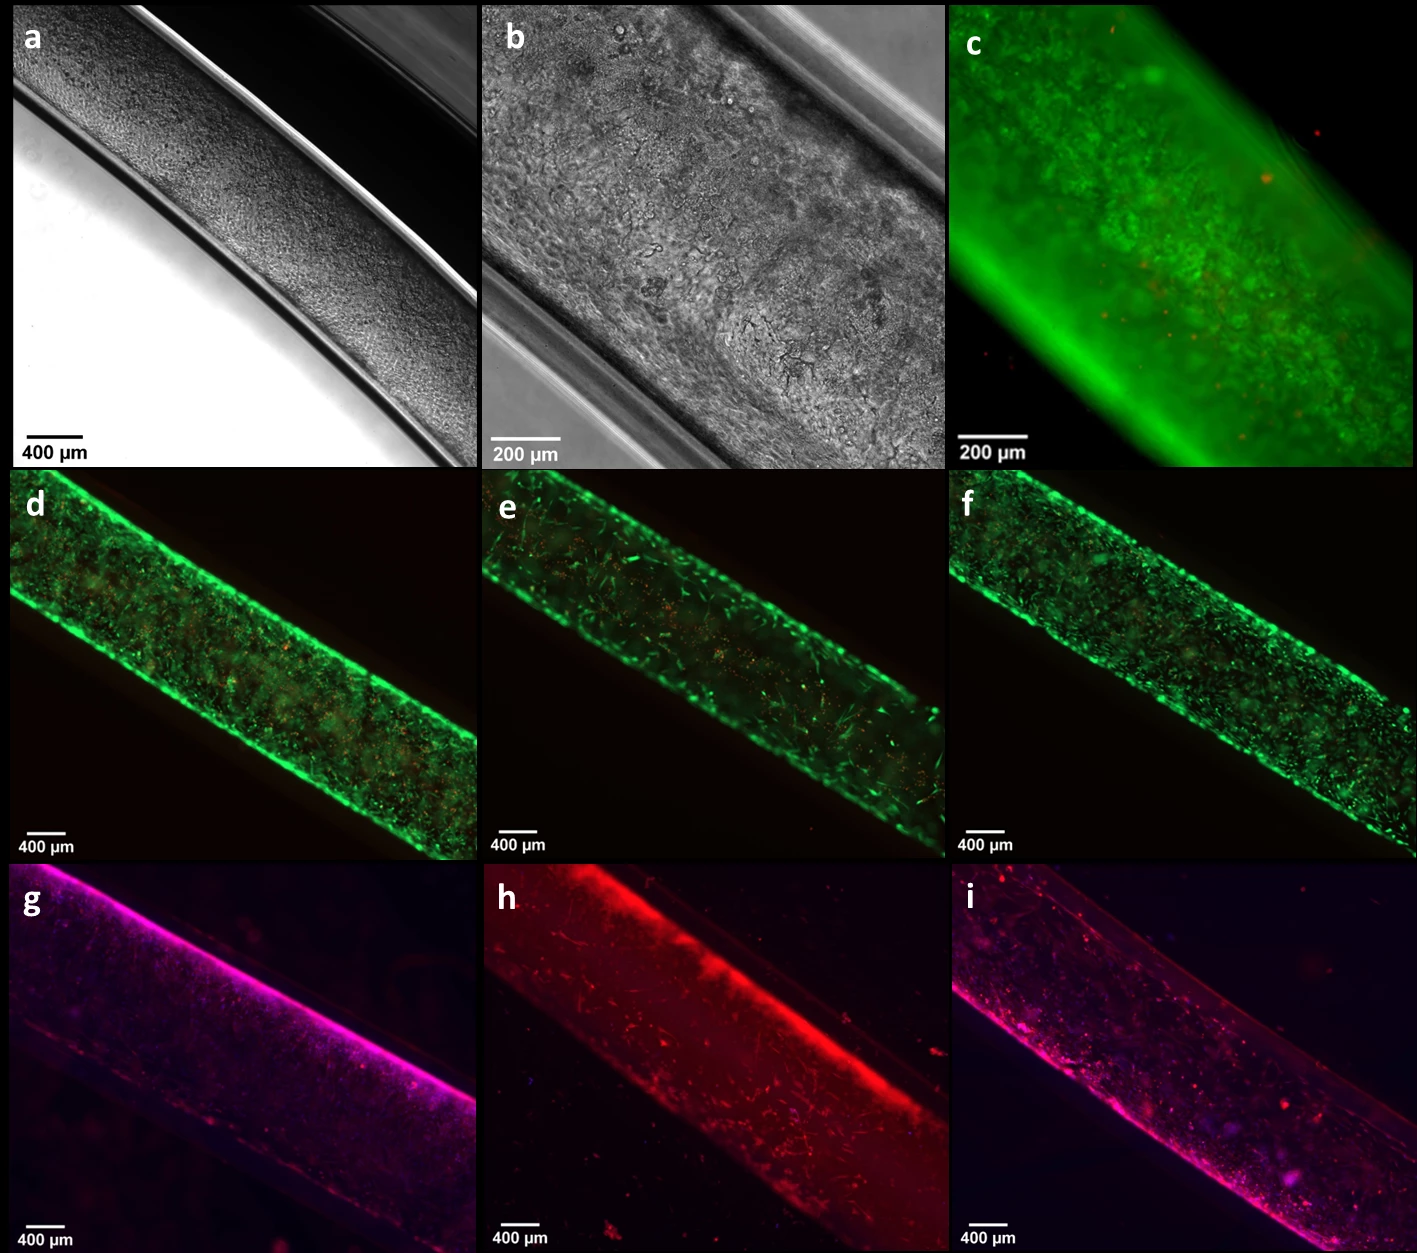 Figure 1: a, b) brightfield microscopic images of co-cultured InMyoFibs+CaCO2 cells in the lumen of bioprinted tubes at day 4 after seeding CaCO2 cells; c) viability of co-cultured InMyoFibs+CaCO2 cells in the lumen of bioprinted tubes at Day 10 after seeding CaCO2 cells; d, e, f) microscopic images showing the viability of InMyoFibs+InEpCs +CaCO2 cells in the lumen bioprinted tubes at day 7 after addition of 1.5 ug/ml bleomycin, 10 mg/ml for minocycline and 40 ng/ml TGF-beta1, respectively (note that the green color represents live cells, and the red represents dead cells); g, h, i) microscopic images showing immunostained for Collagen-I at Day 7 of 1.5 ug/ml bleomycin, 10 mg/ml for minocycline and 40 ng/ml TGF-beta1, respectively.